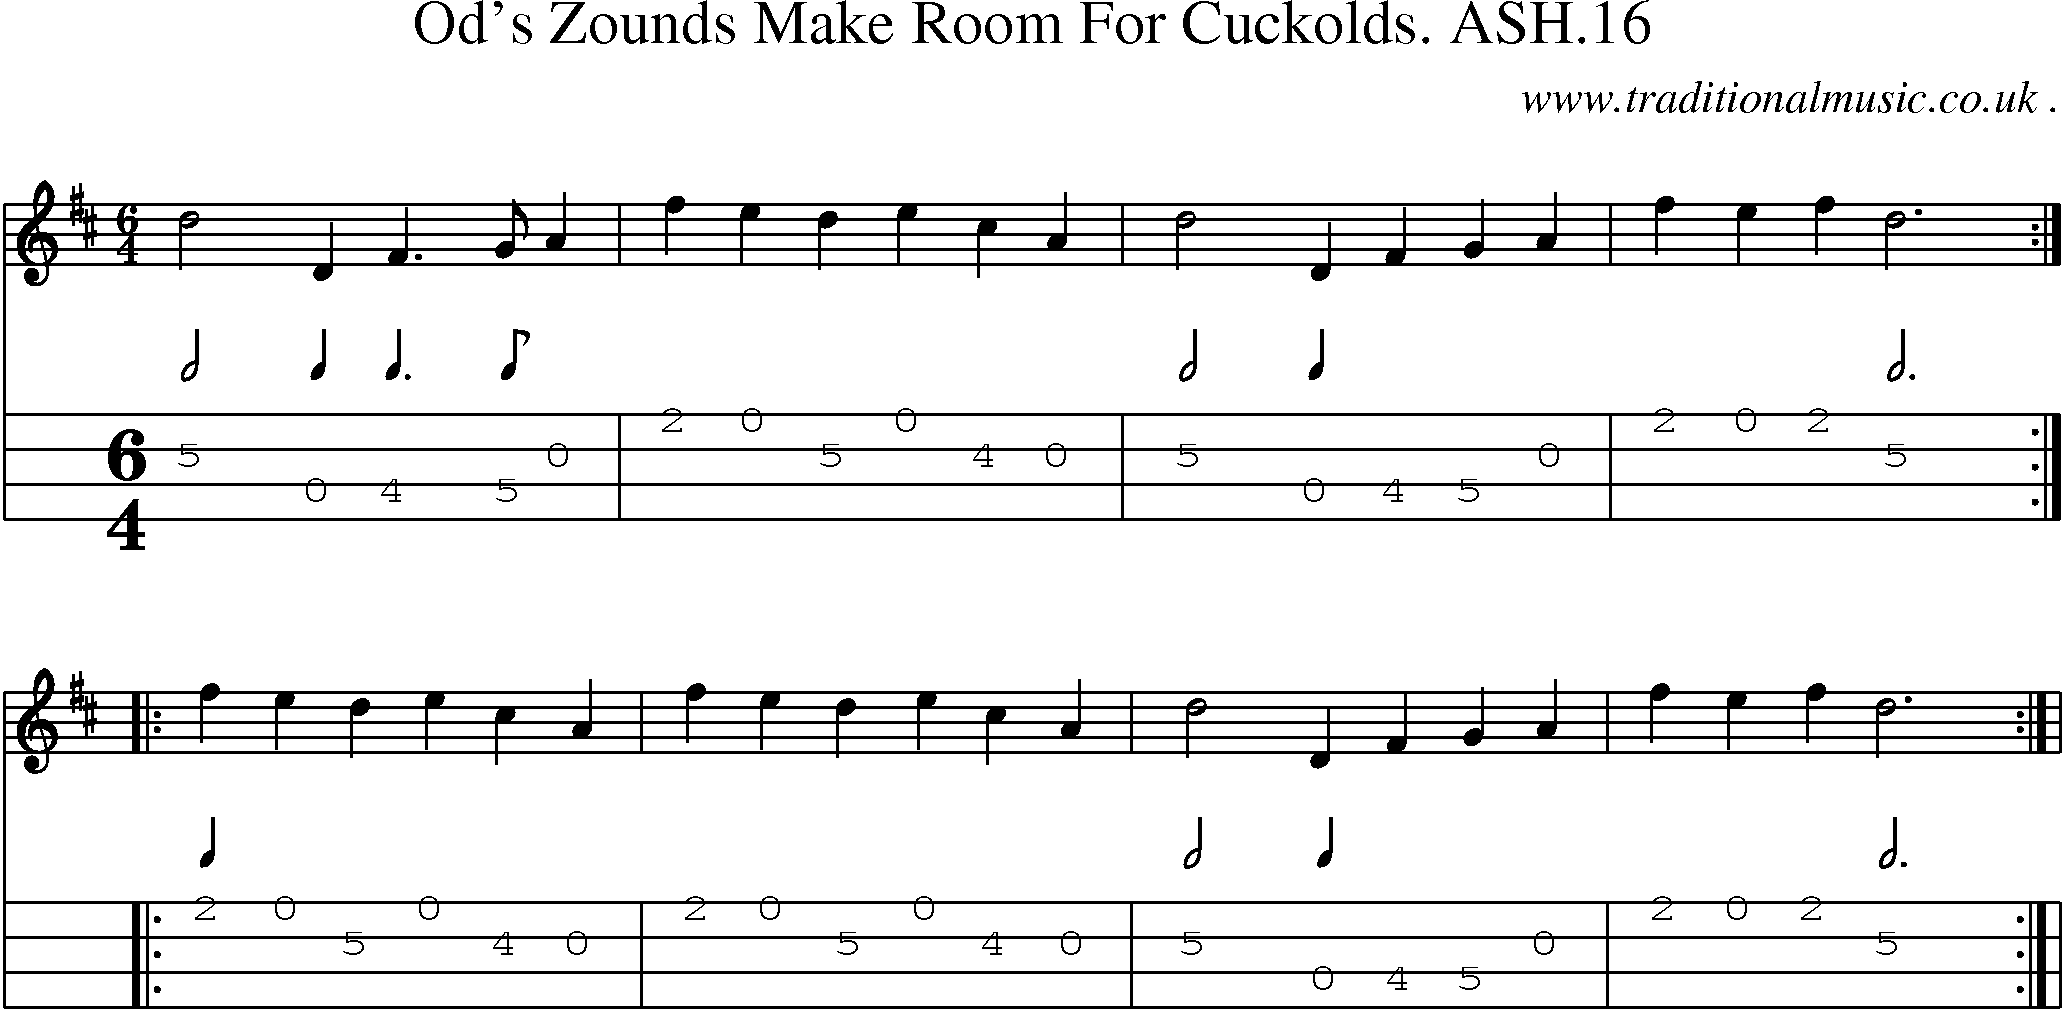 Sheet-Music and Mandolin Tabs for Ods Zounds Make Room For Cuckolds Ash16